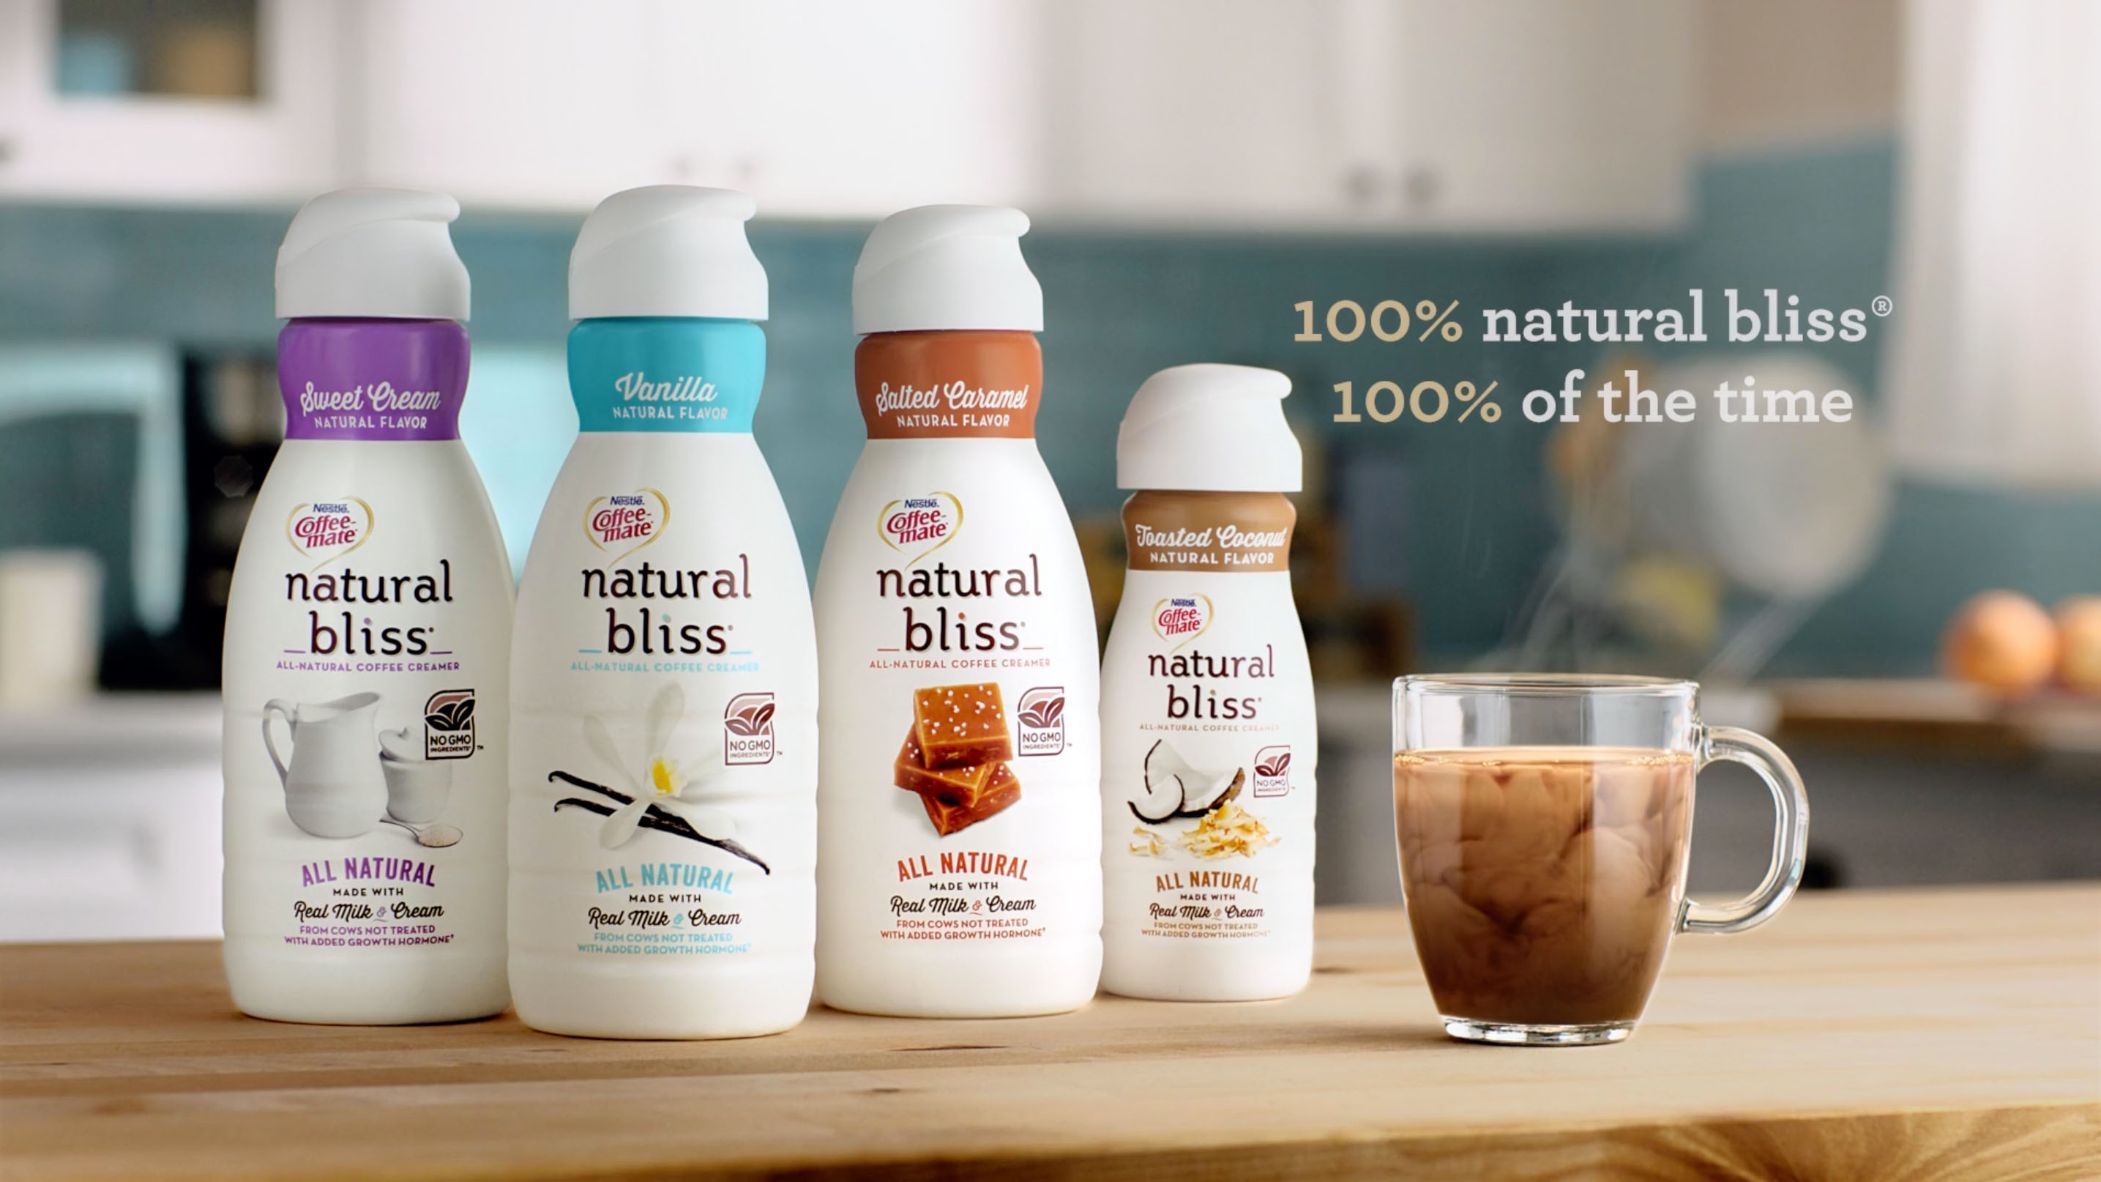 Coffee-Mate Natural Bliss